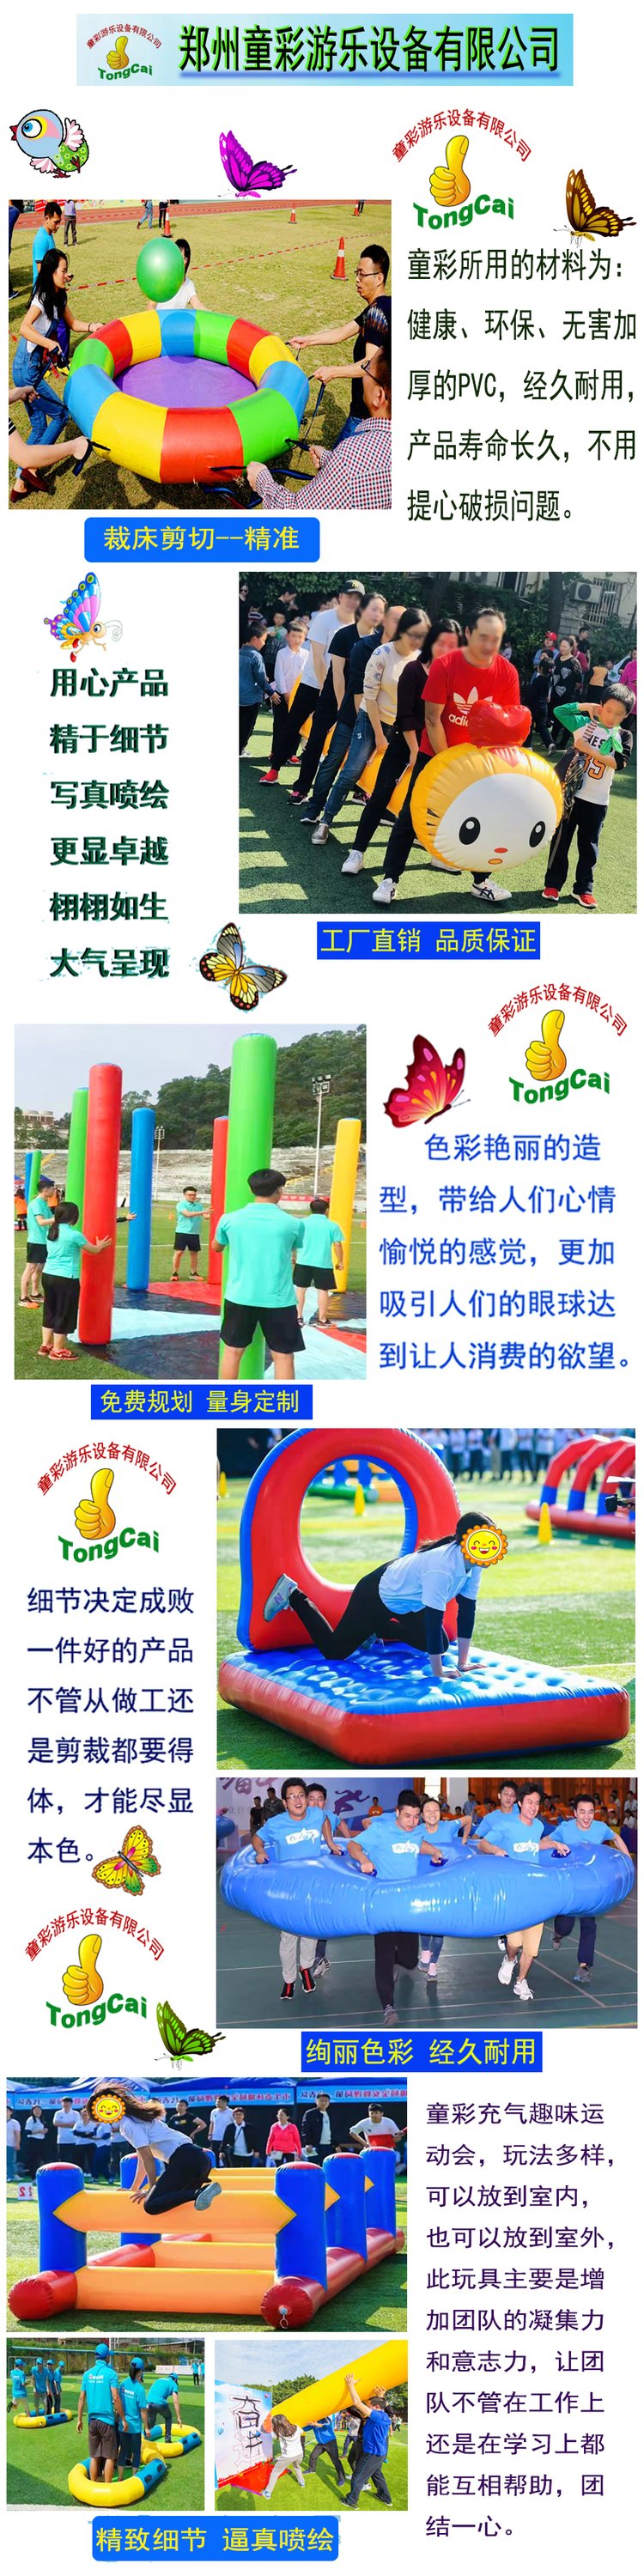 Color Inflatable Running Ball PVC Outdoor Fun Games Props Land Training Equipment